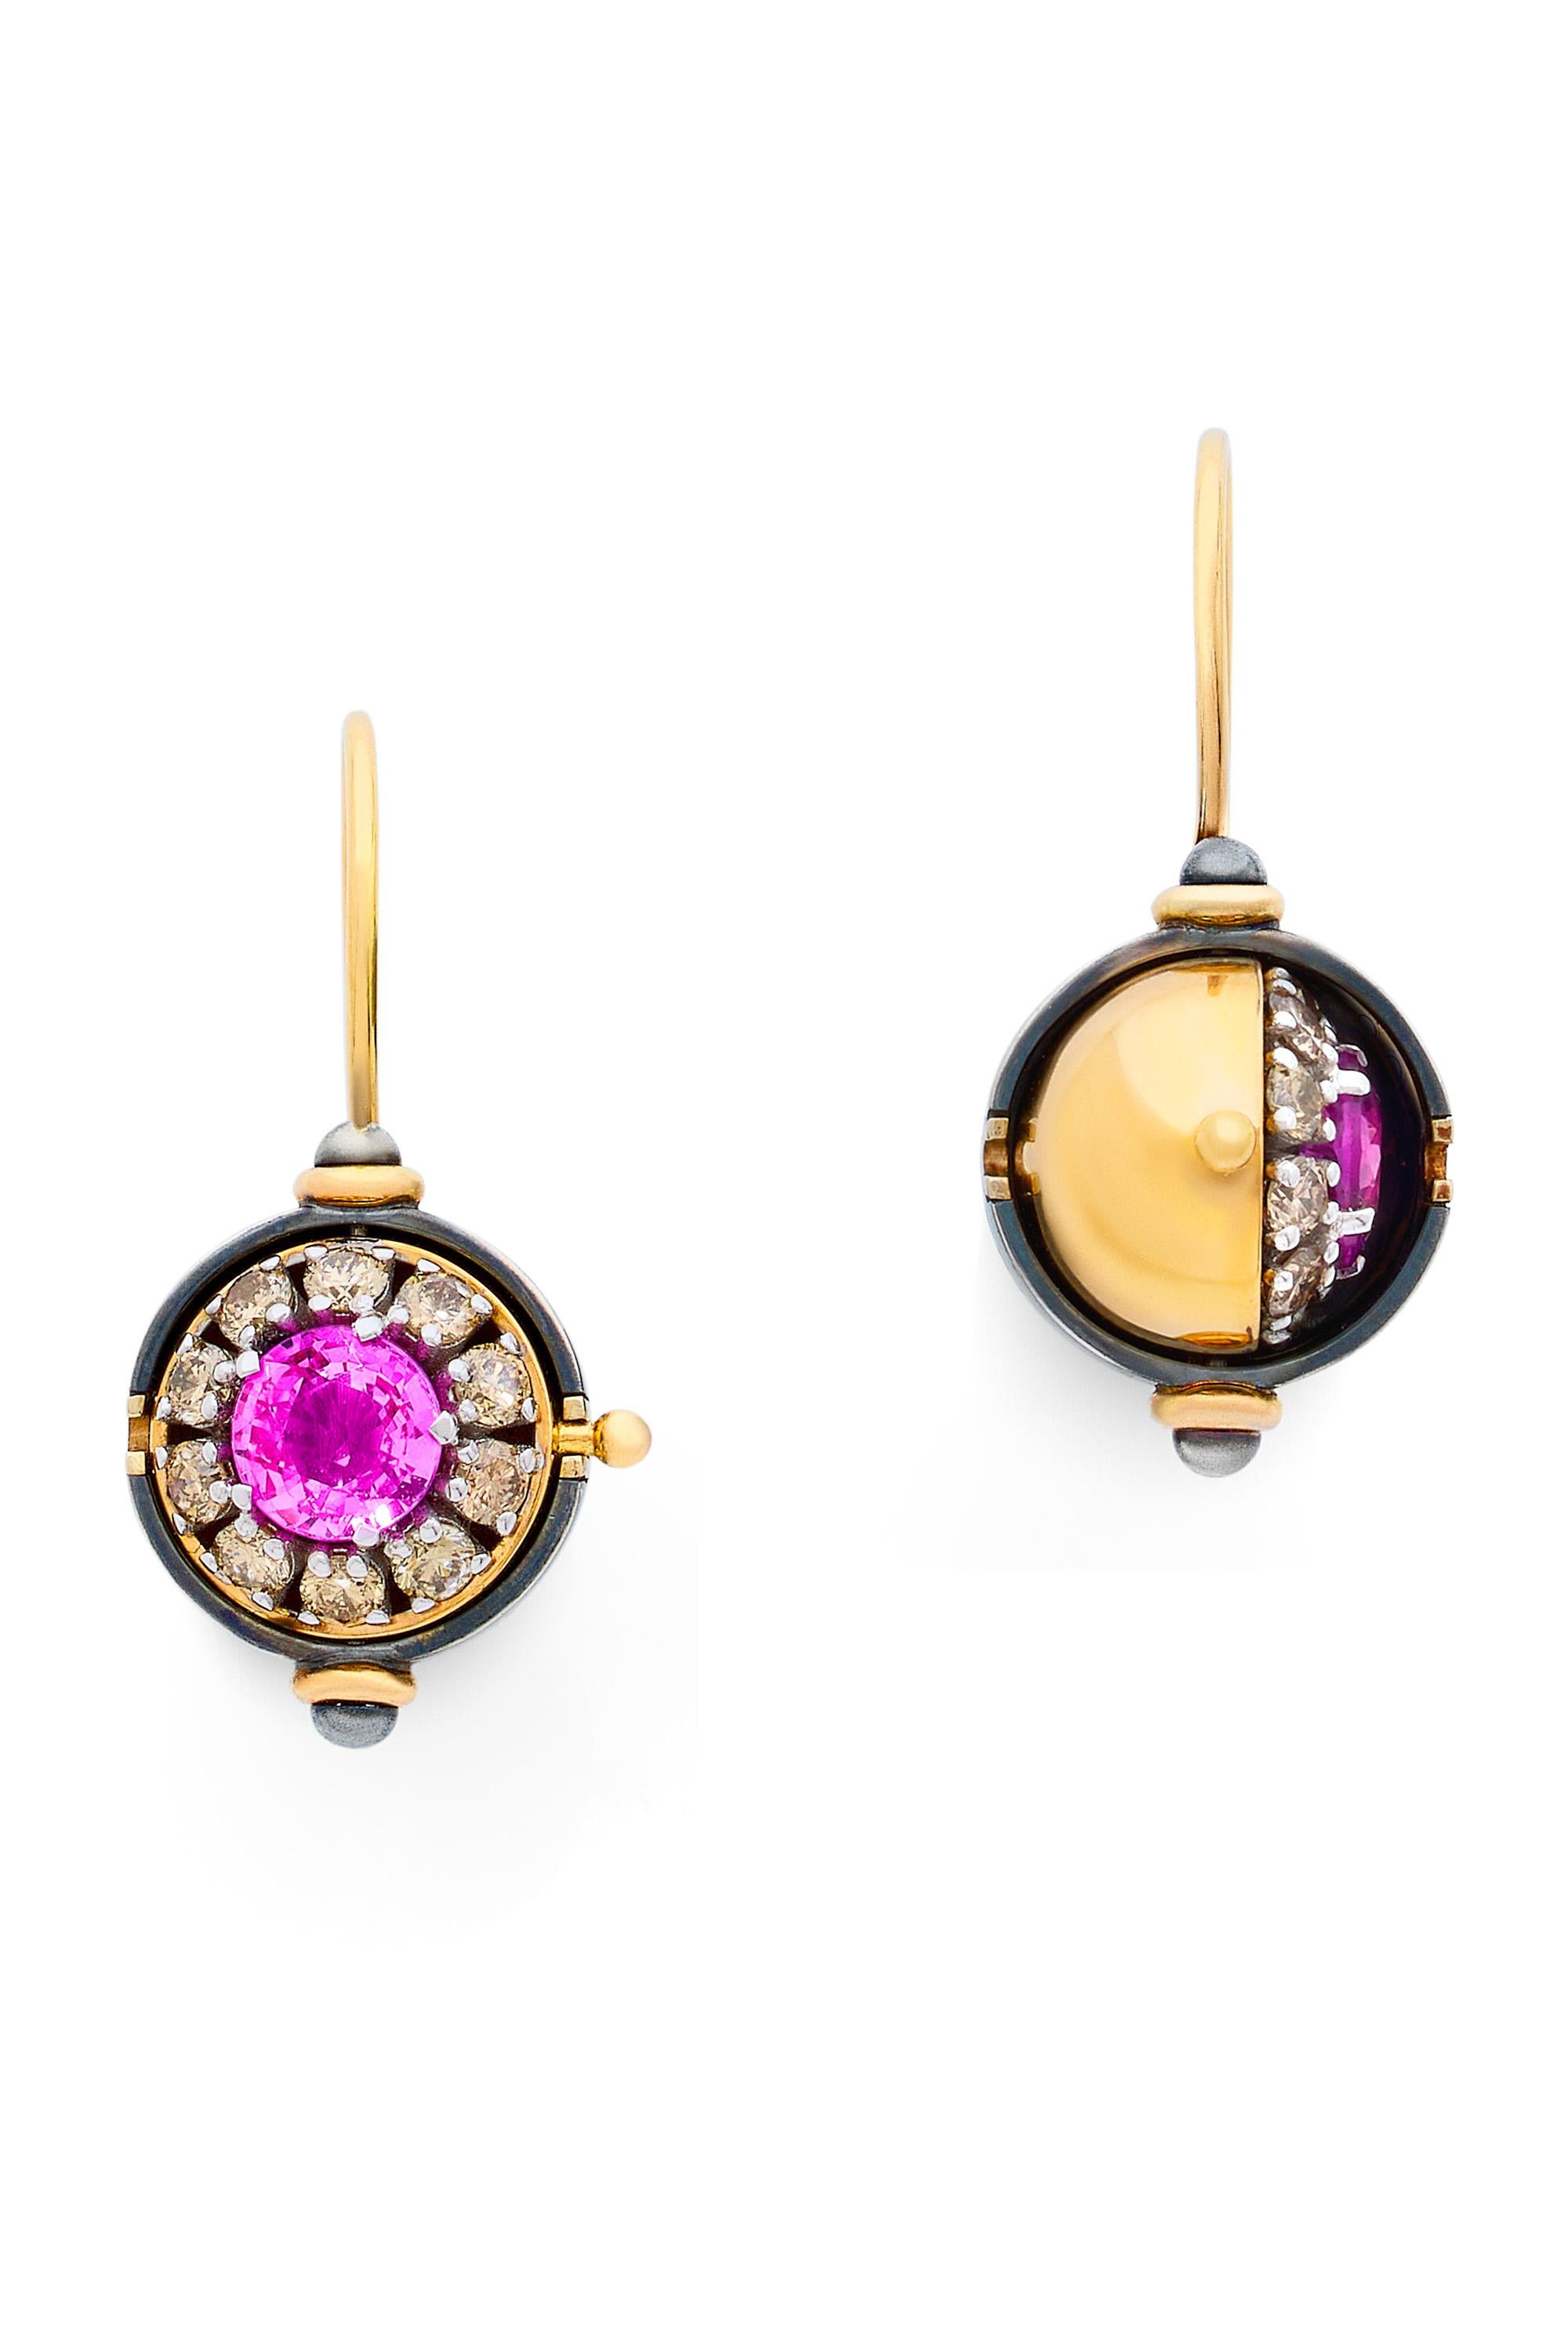 Gold and distressed silver earrings. Rotating spheres revealing a pink sapphire surrounded by diamonds.

Details: 
2 Pink Sapphire :  2.5 cts
20 Diamonds: 1.2 cts 
18k Rose Gold: 15 g
Distressed Silver : 5 g
Made in France